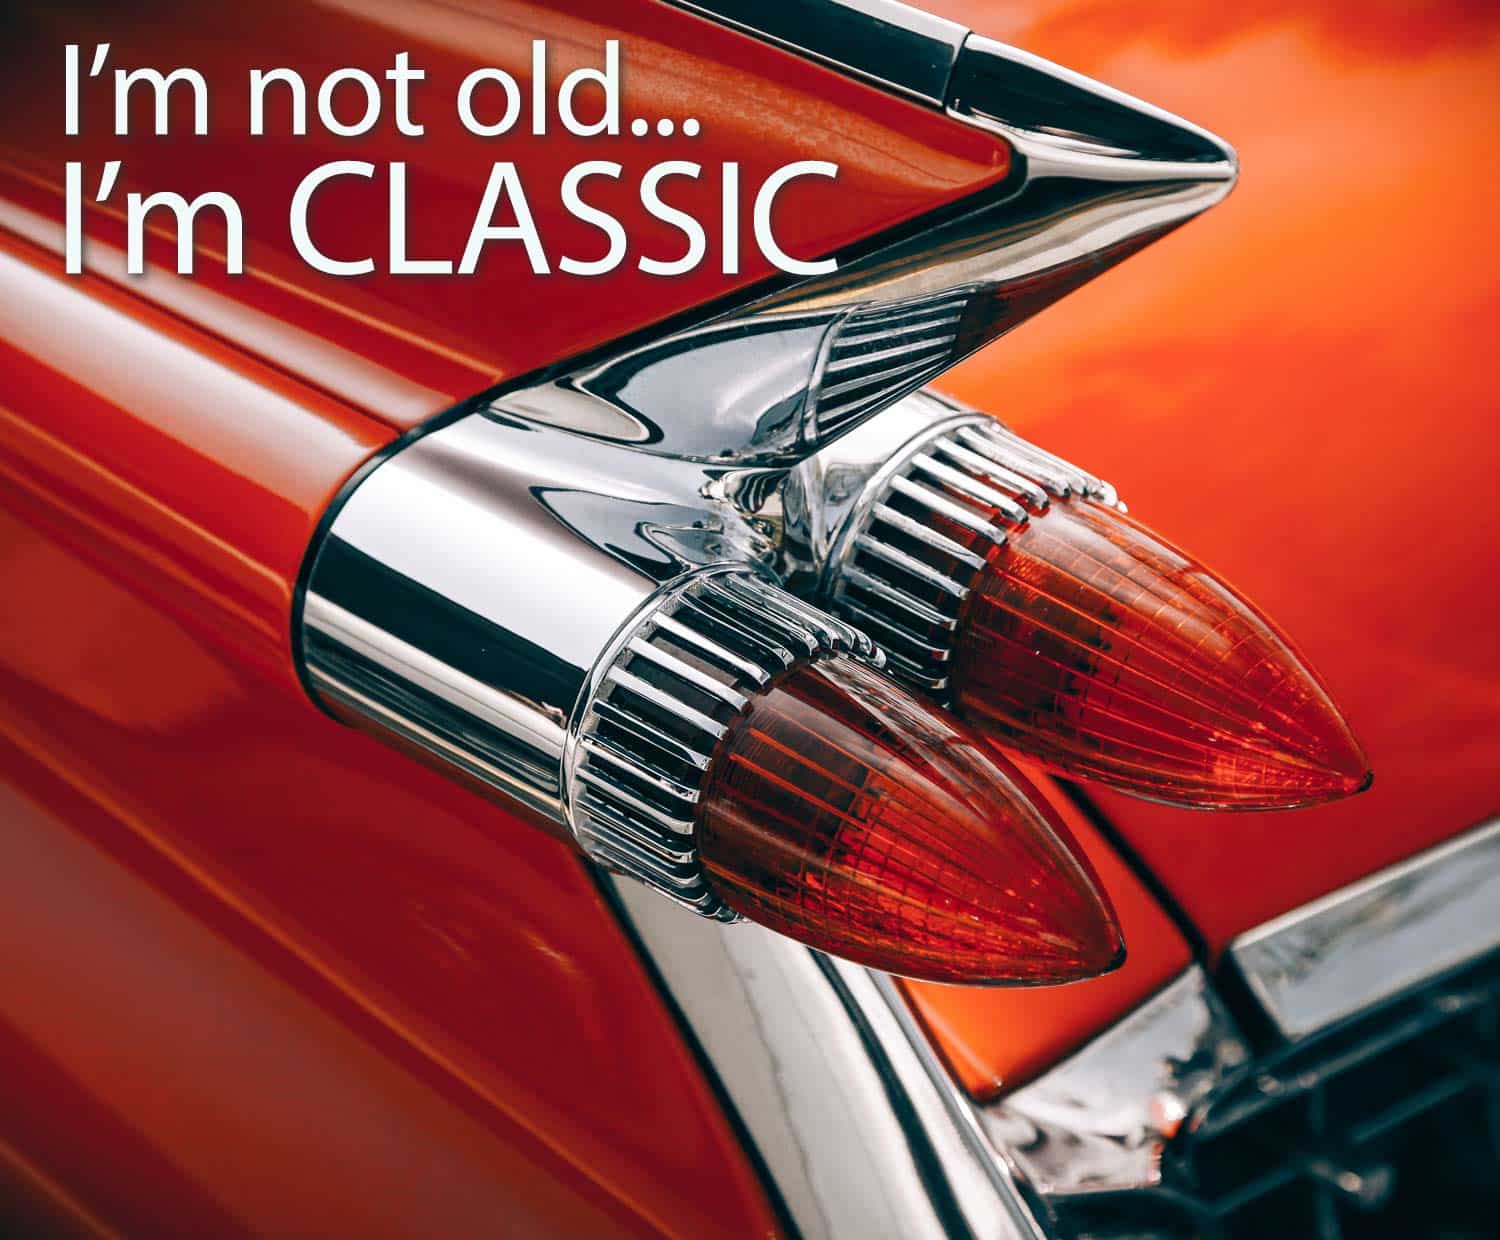 Tail-lights-I'm-not-old-I'm-classic